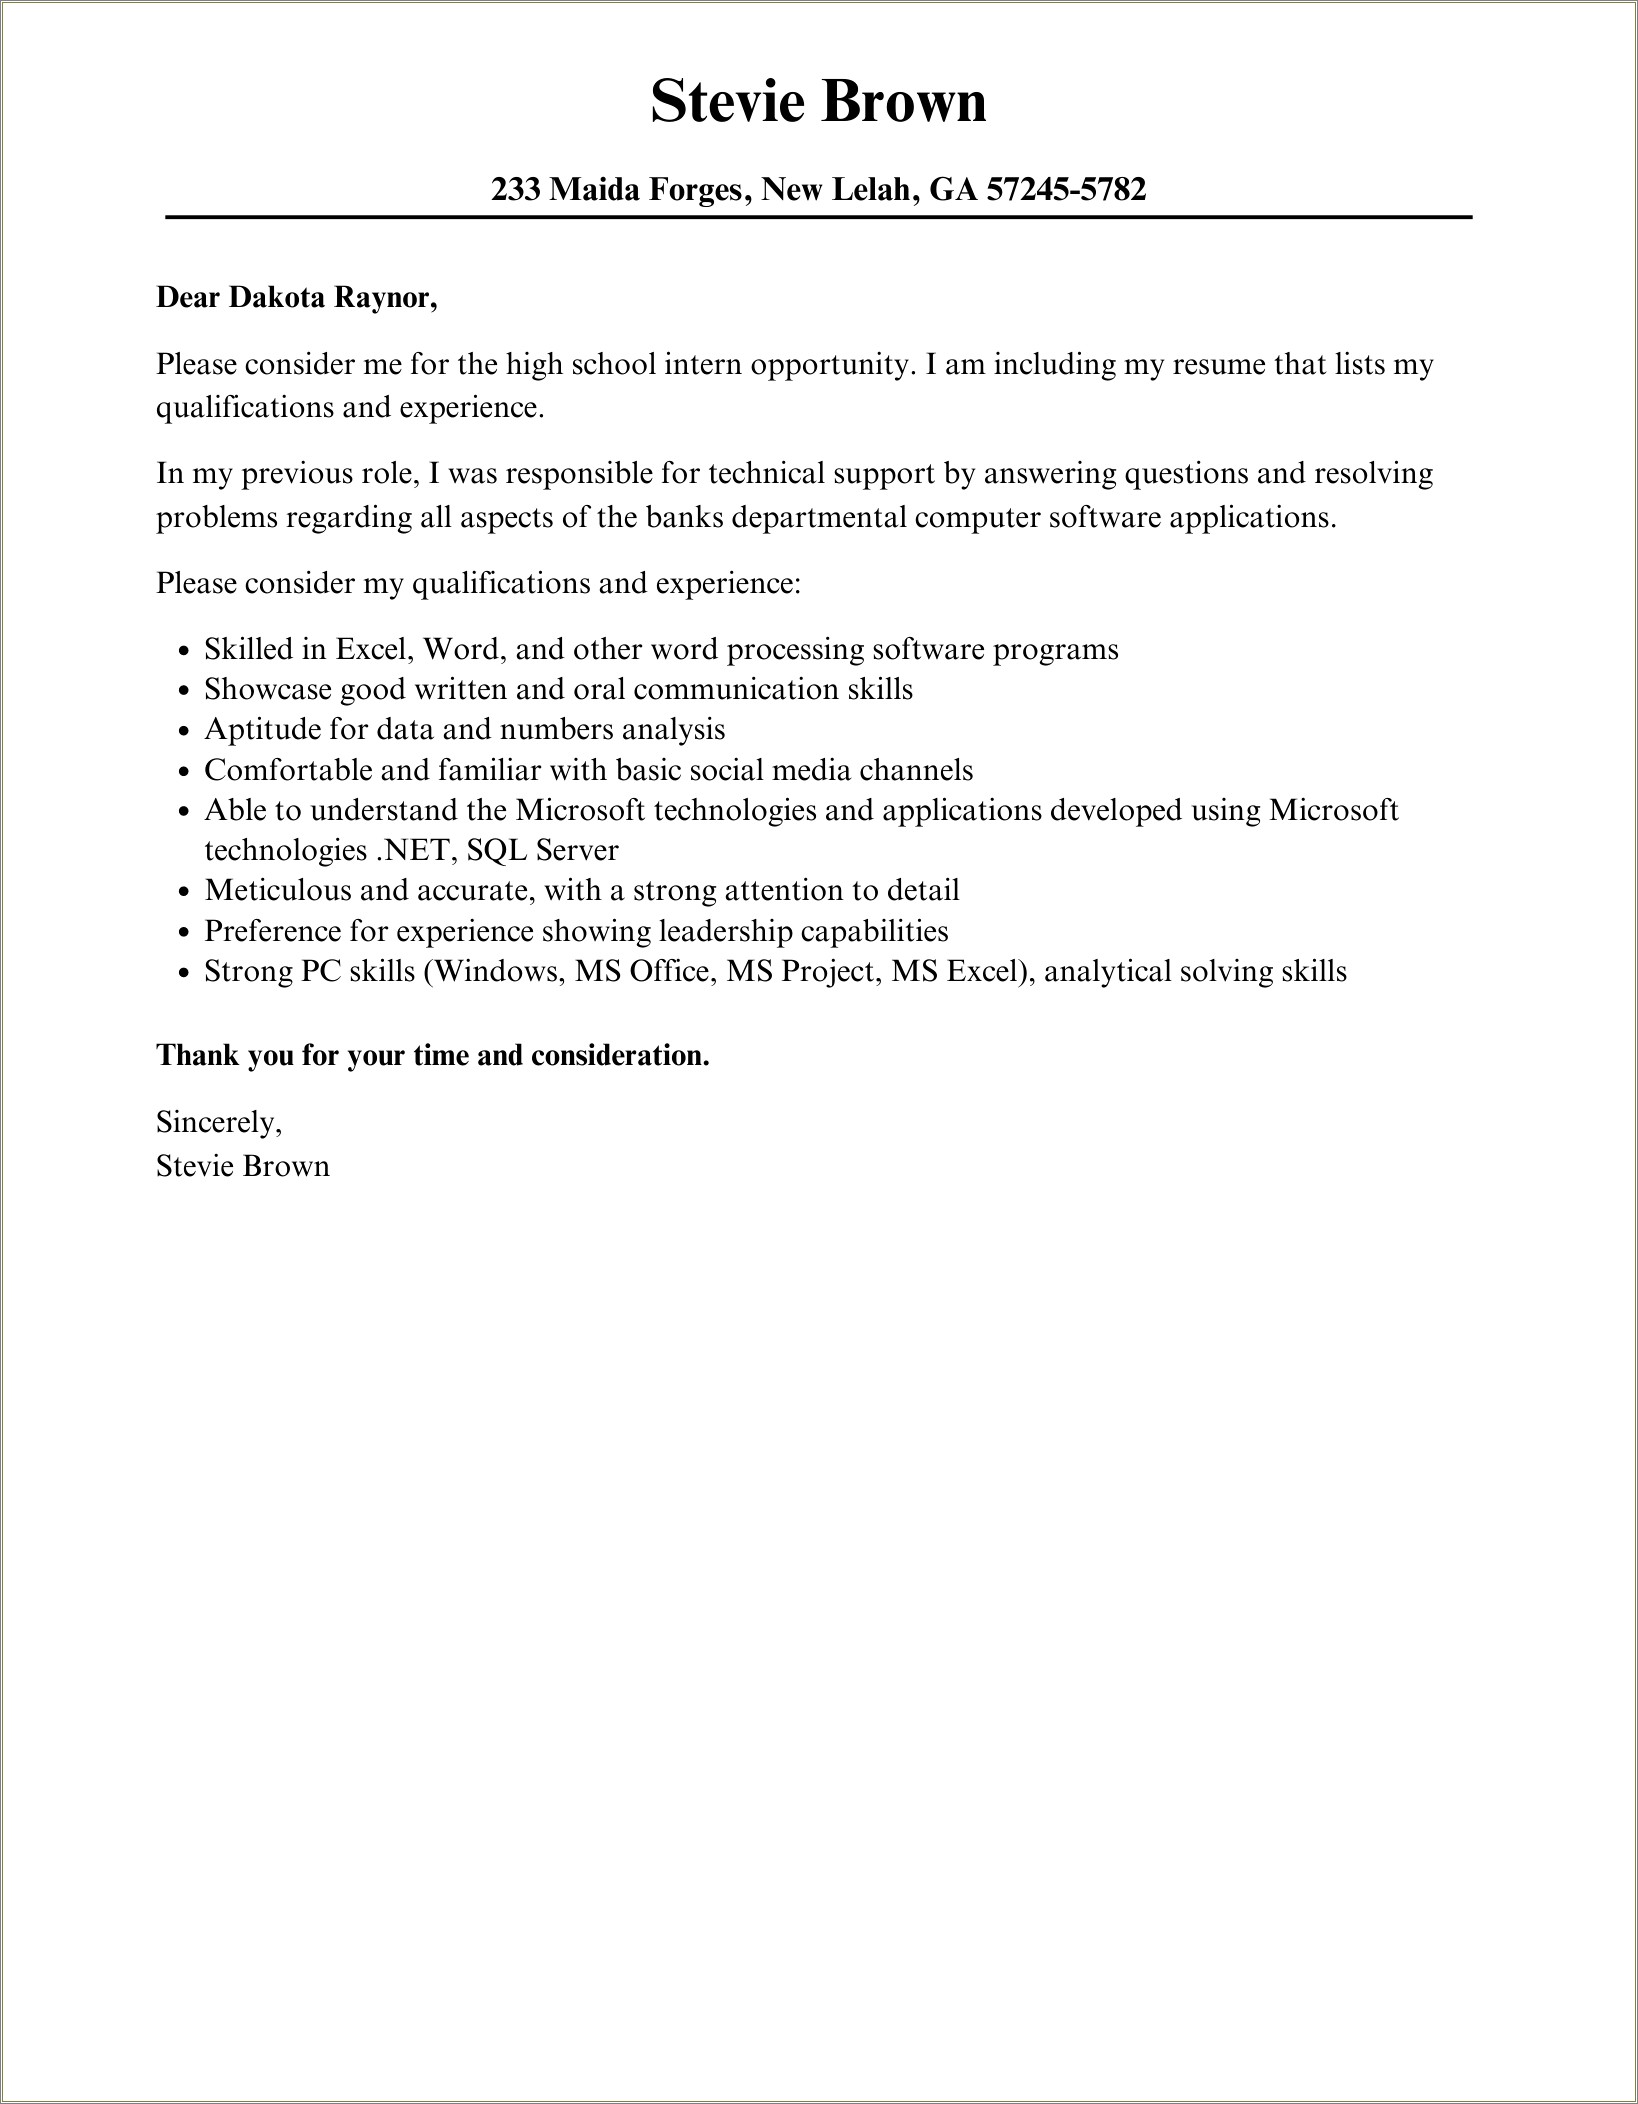 Resume Cover Letter Template For High School Students